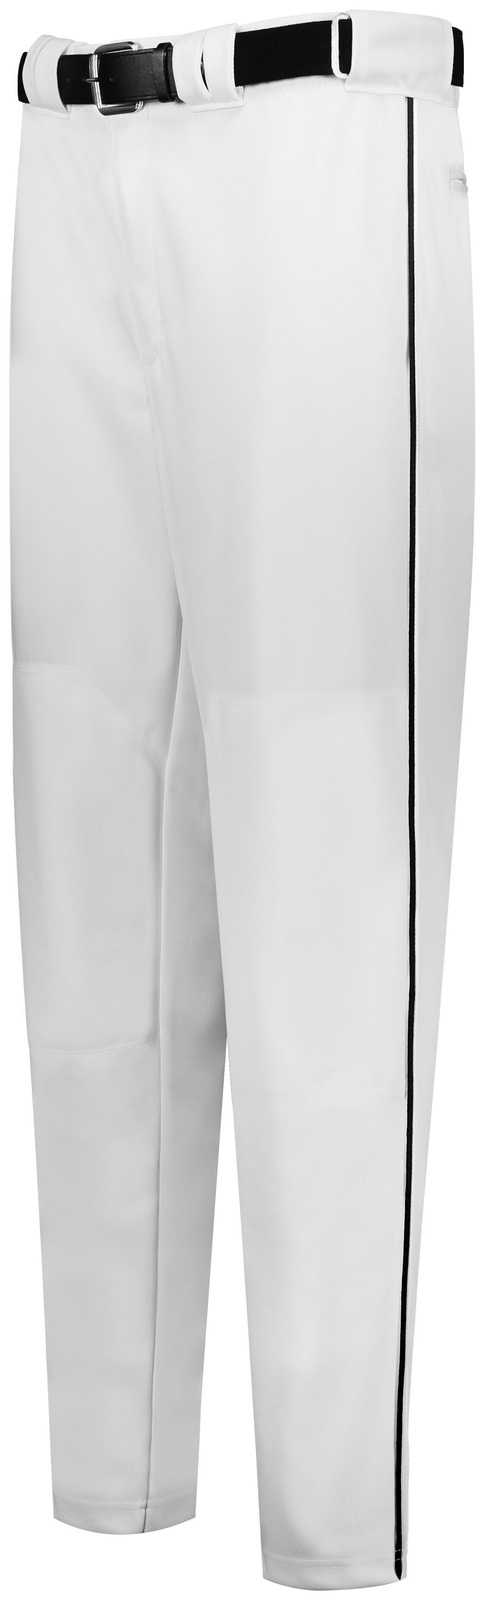 Russell R11Lgb Youth Piped Diamond Series Baseball Pant 2.0 - White Black - HIT a Double